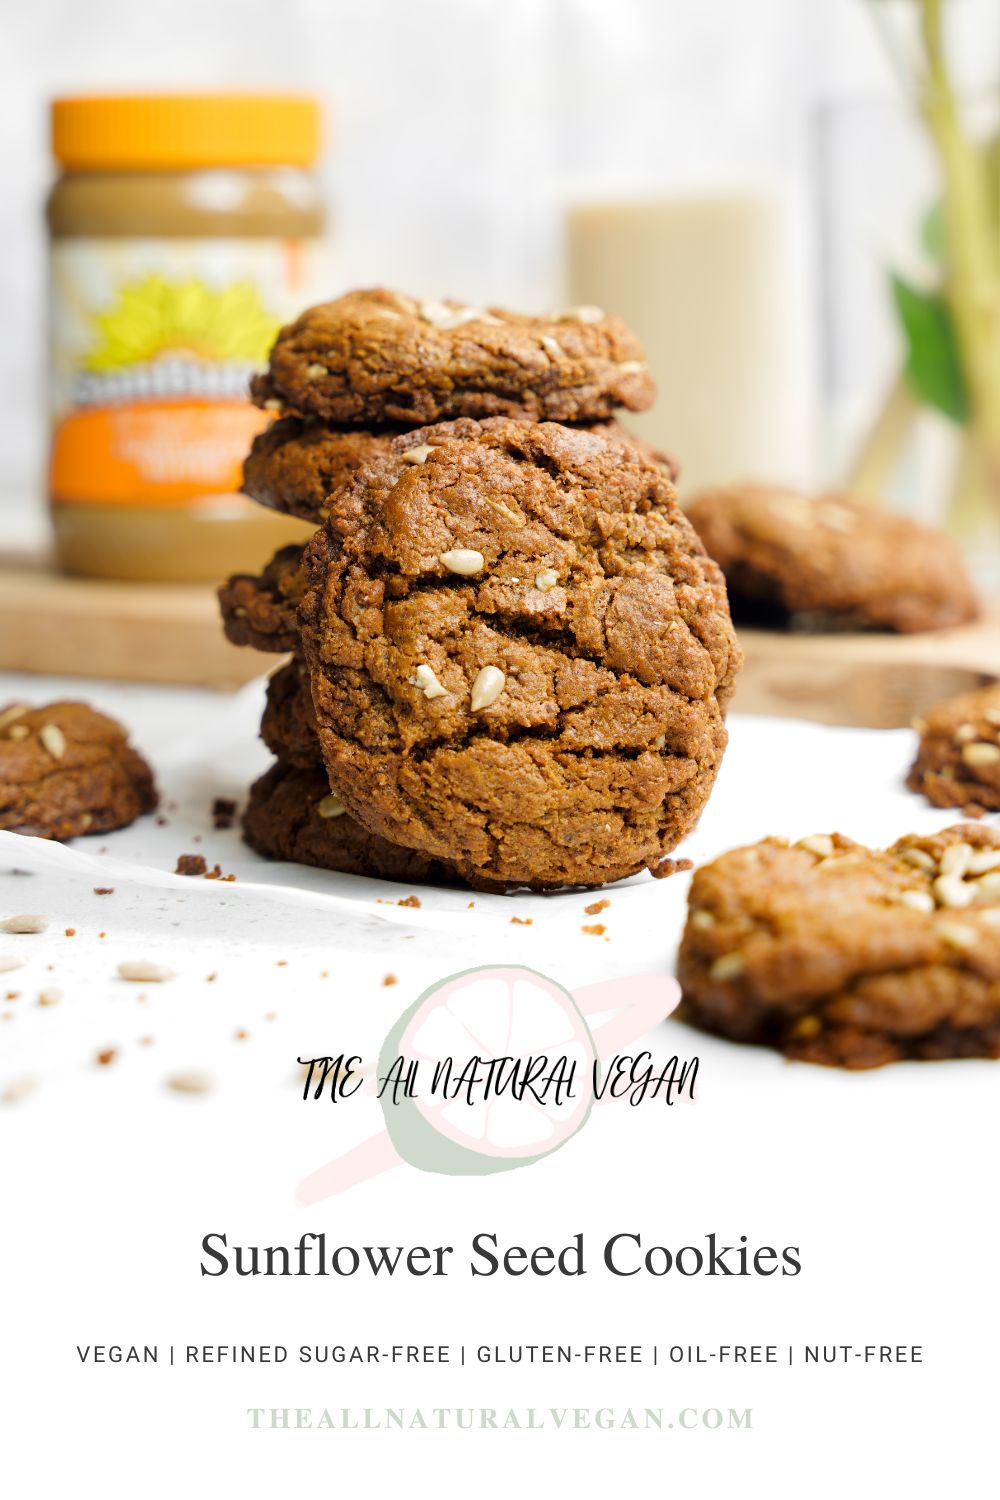 recipe card stating this sunflower seed cookie recipe is vegan, refined sugar-free, gluten-free, oil-free, and nut-free